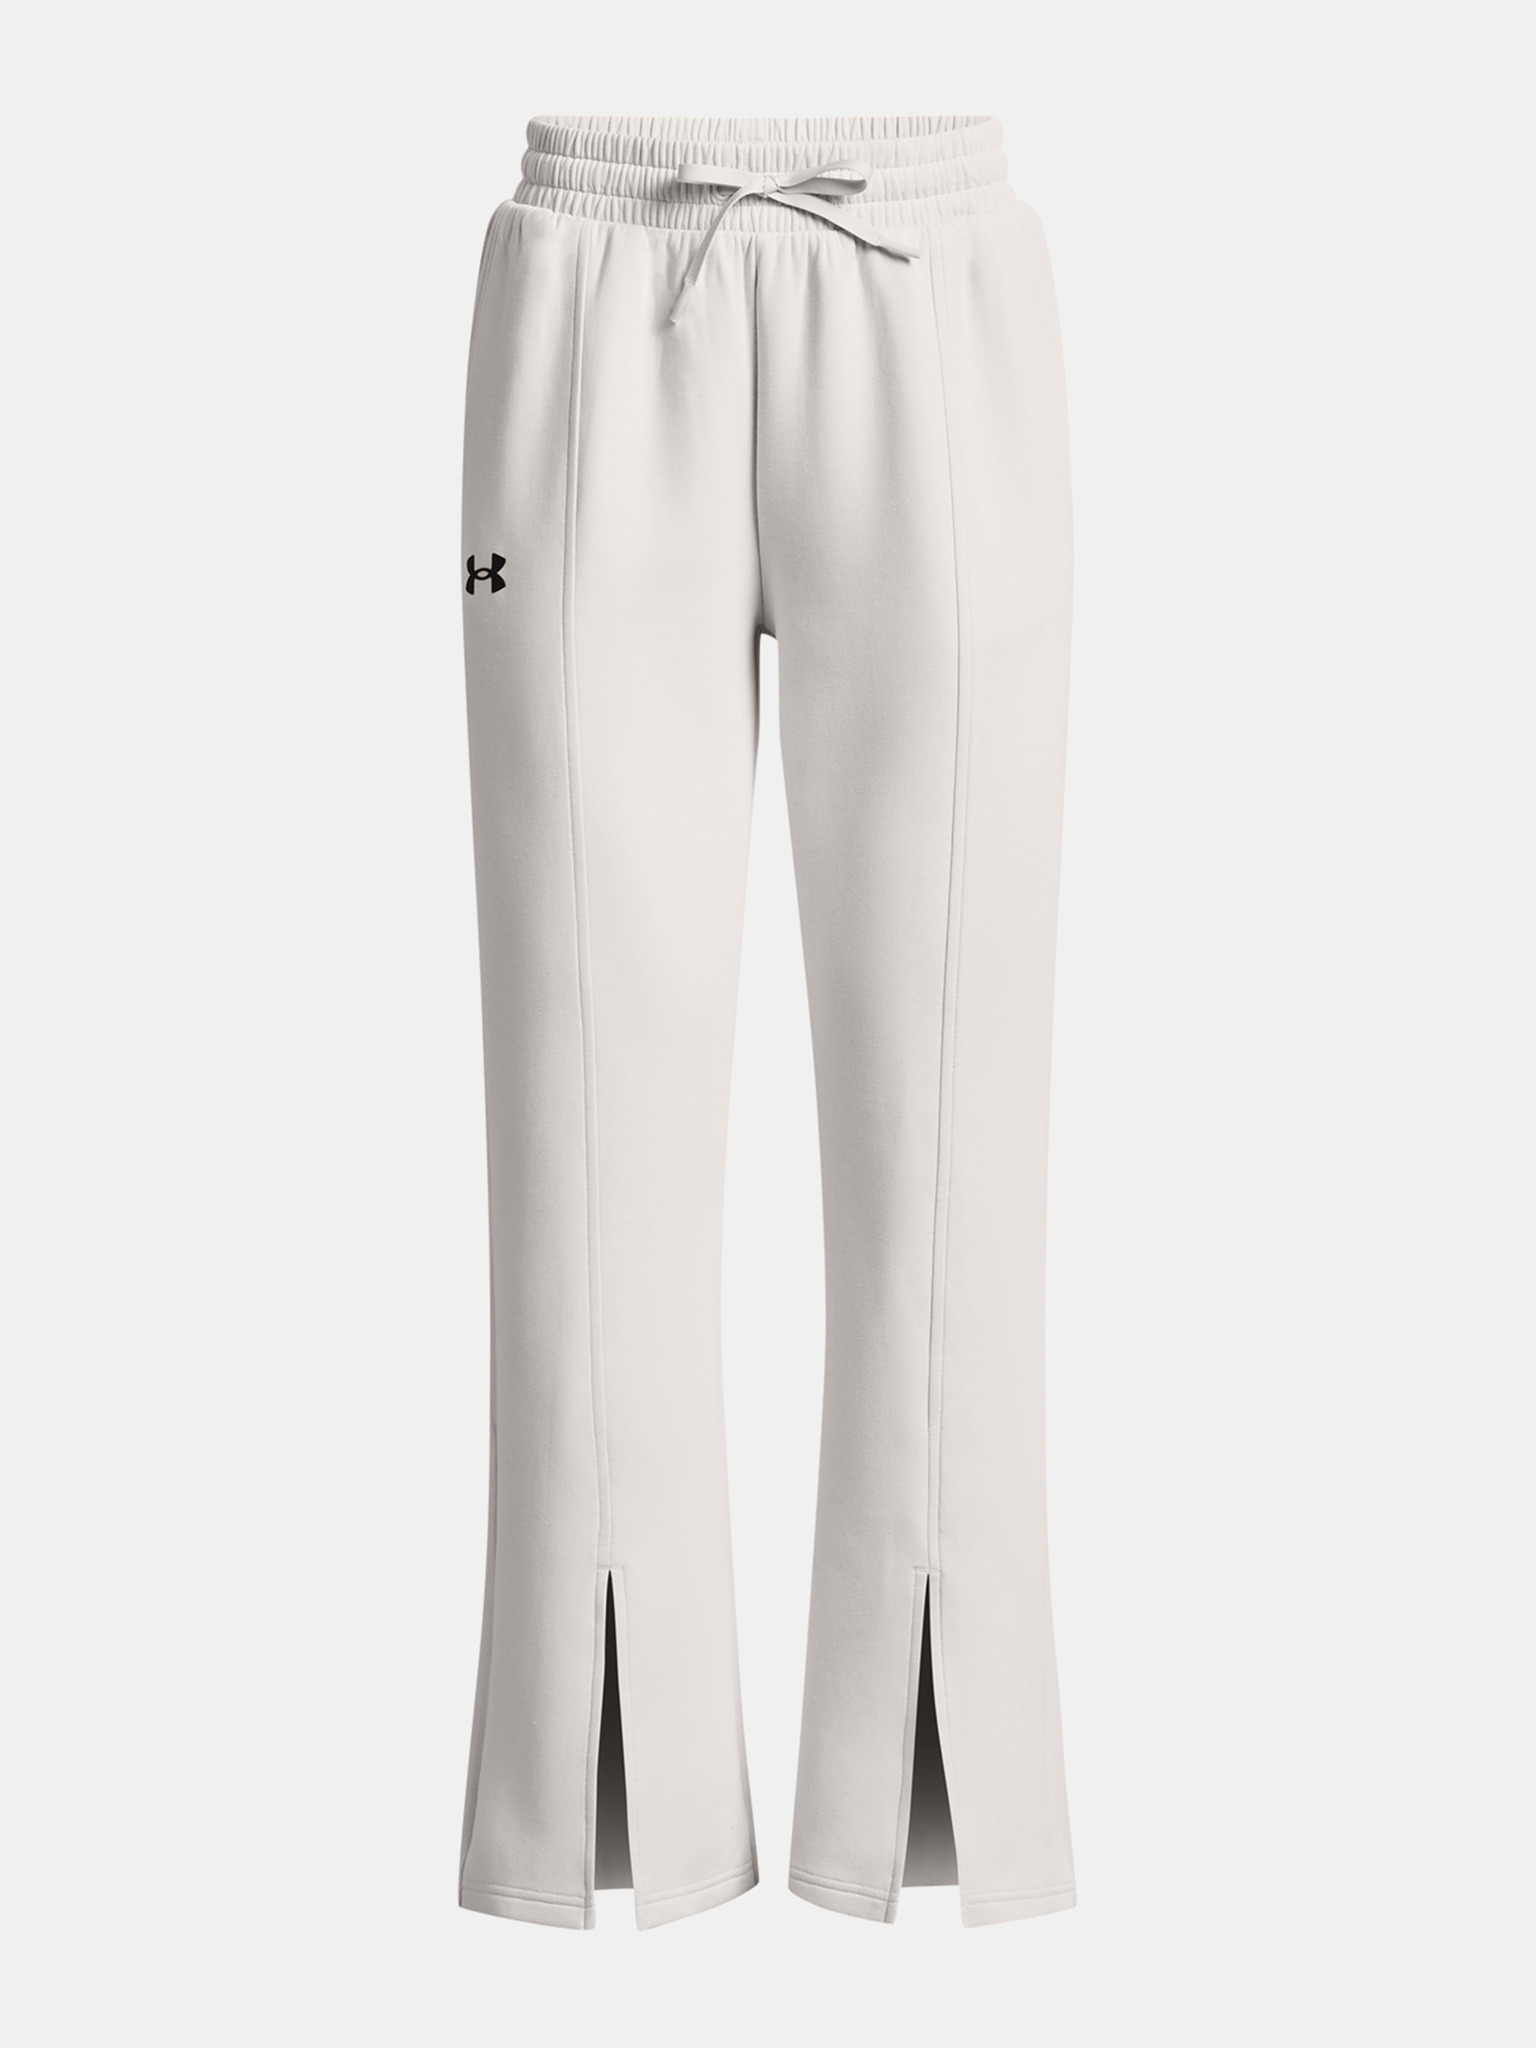 Under Armour Women's Unstoppable Pants